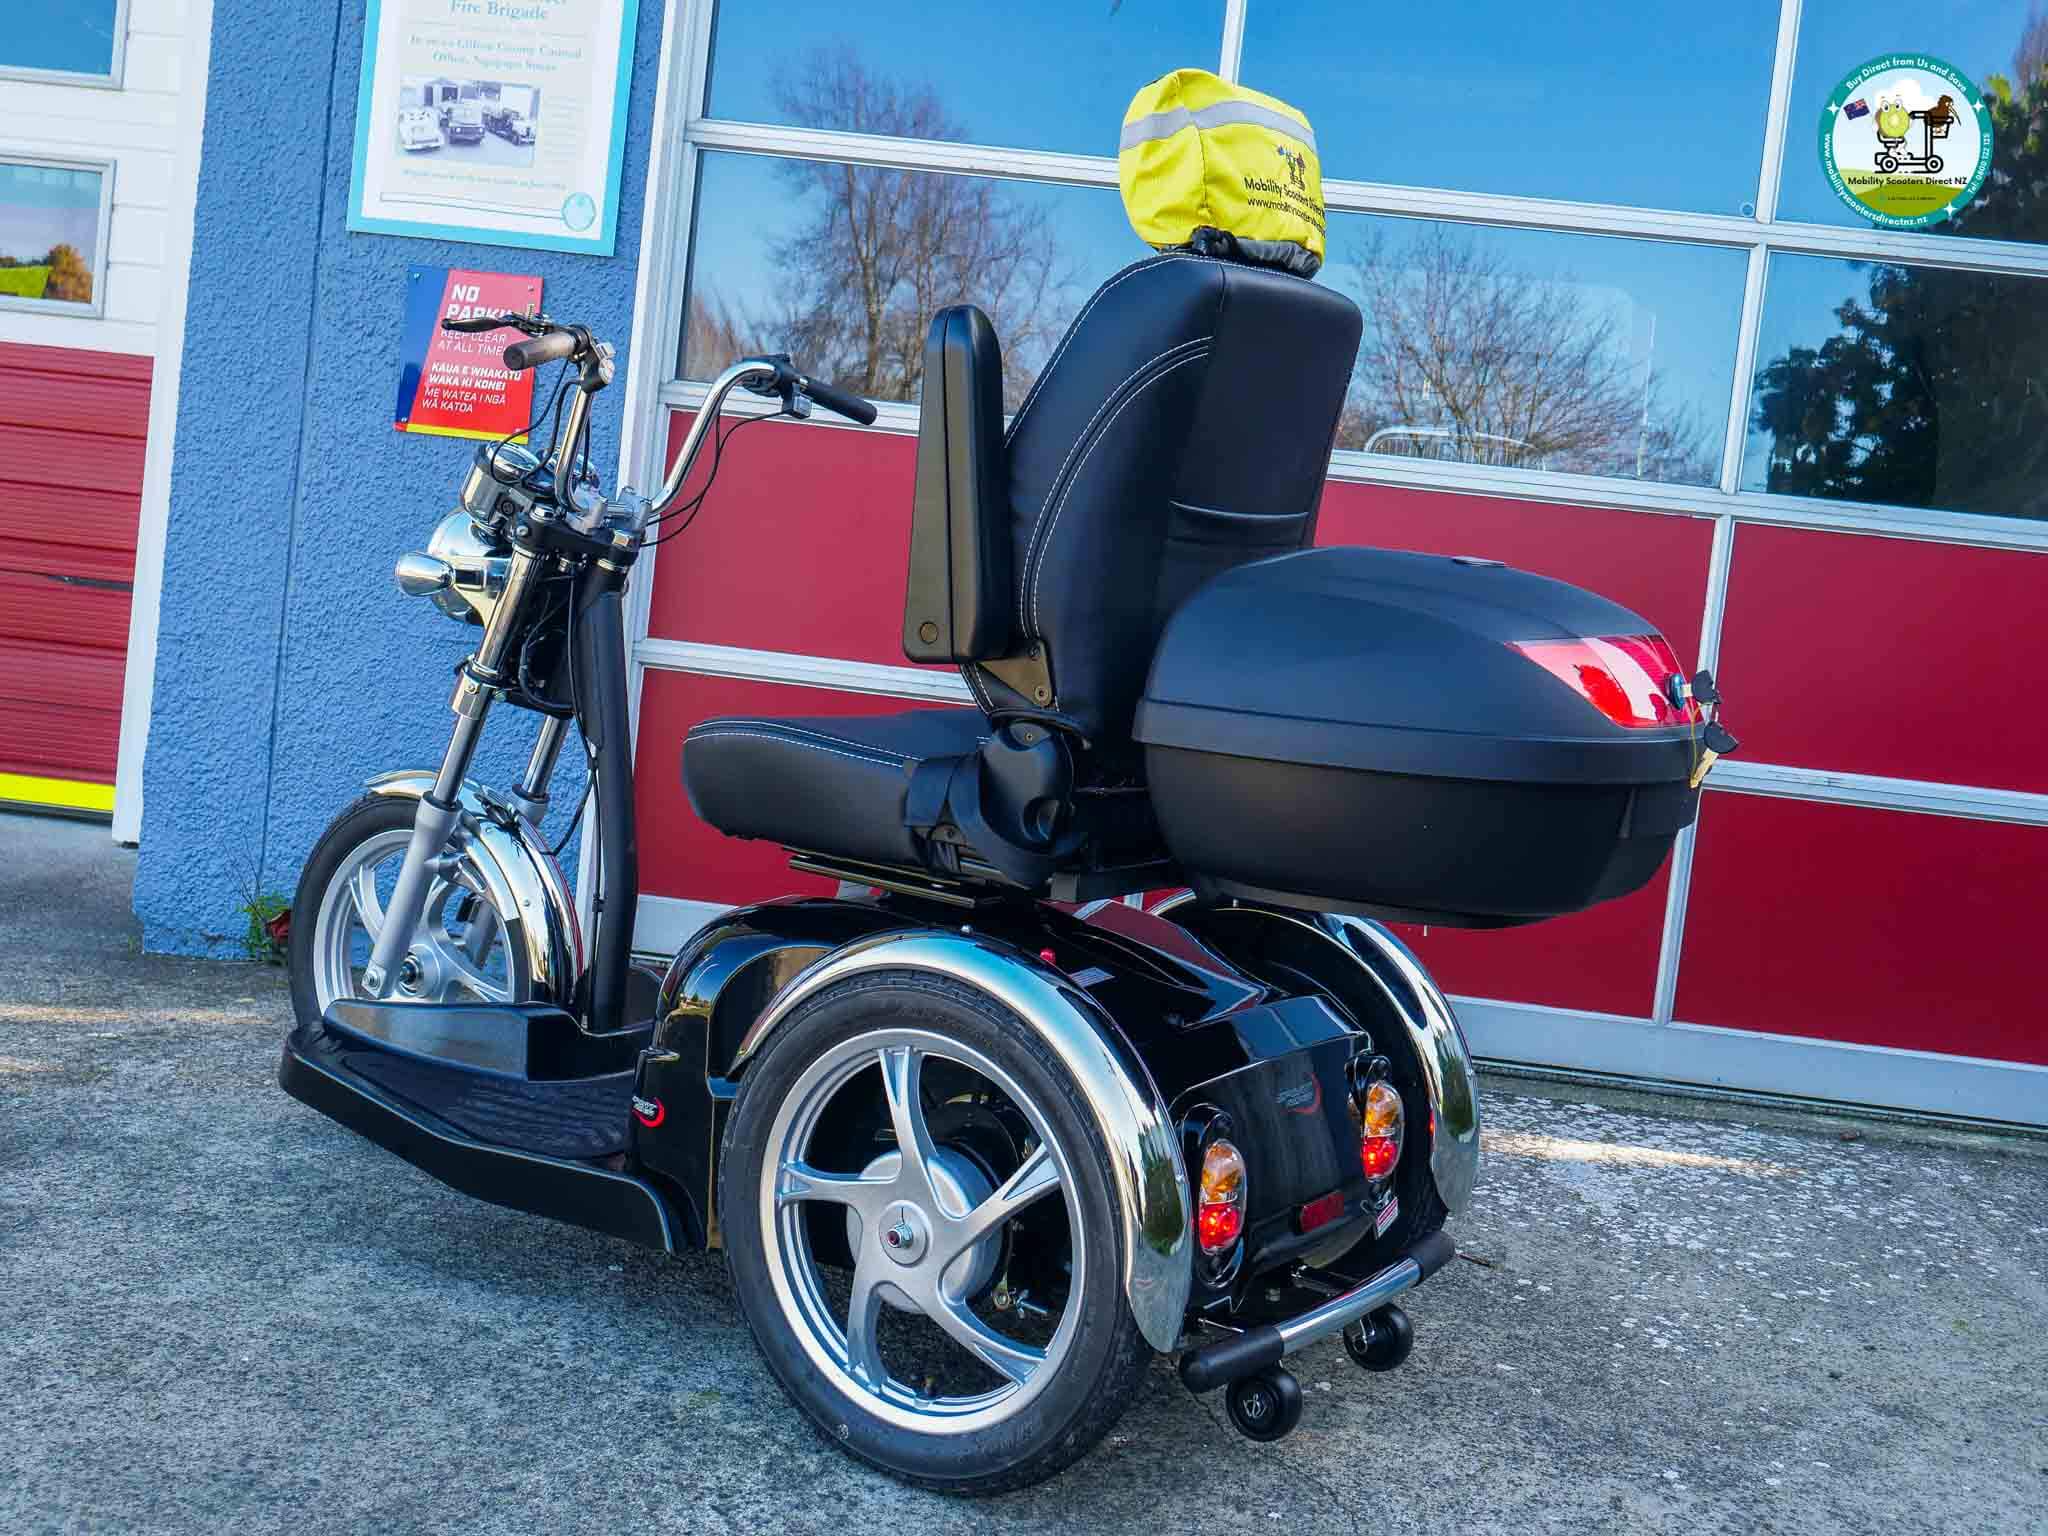 Pride Sport Rider Mobility Scooter